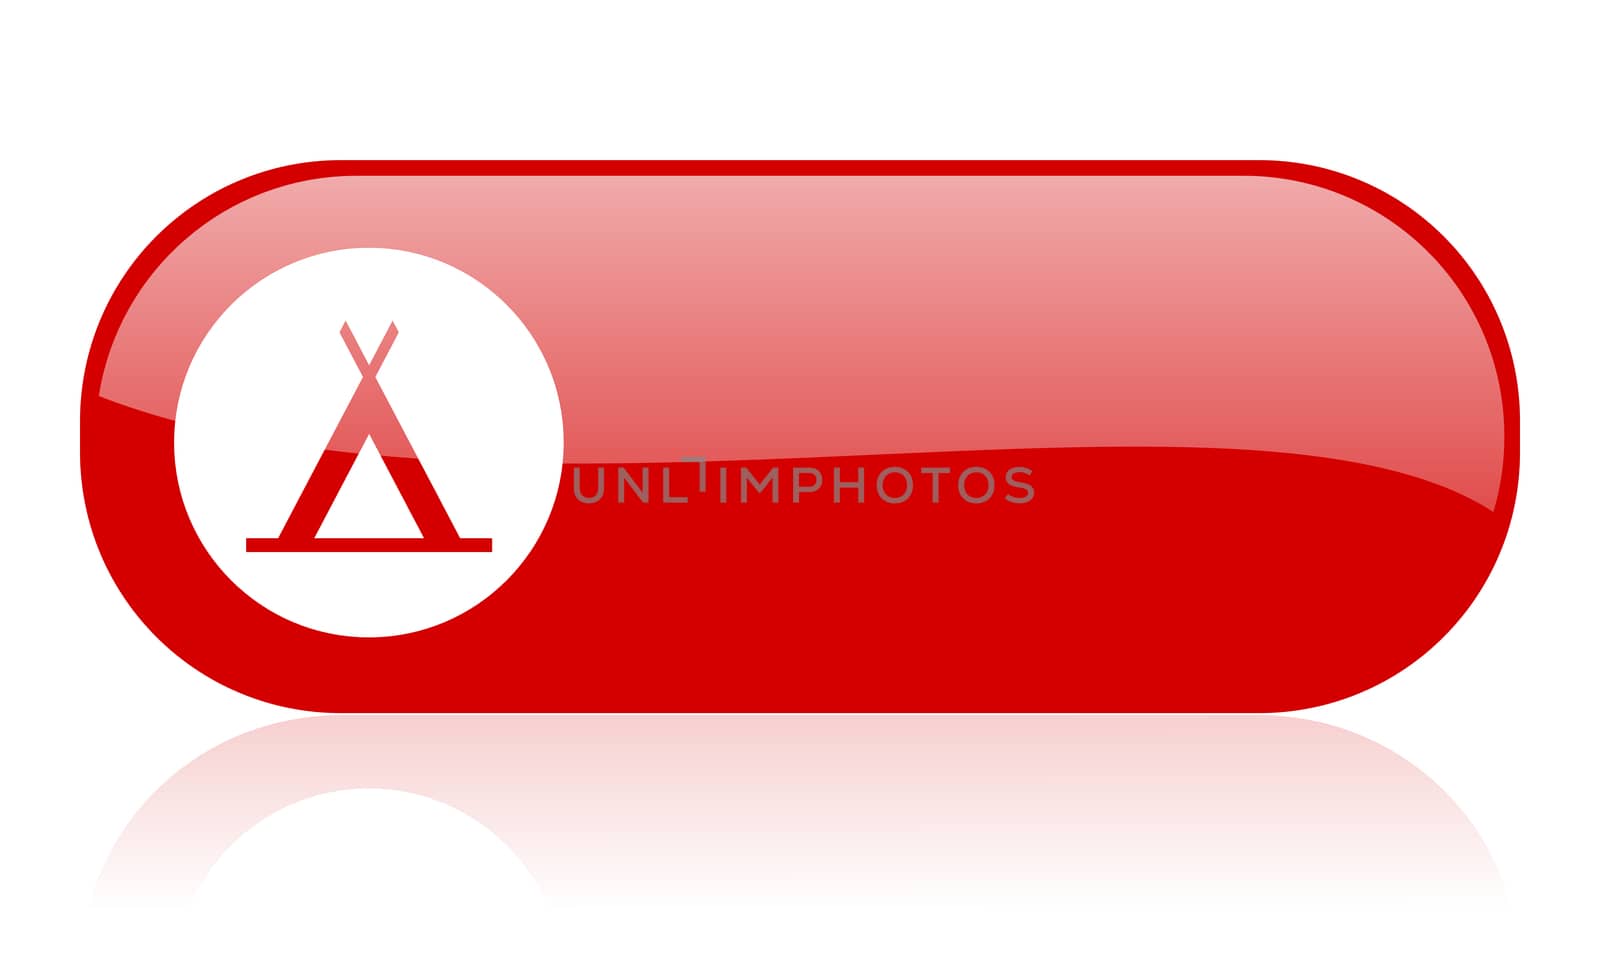 camping red web glossy icon by alexwhite